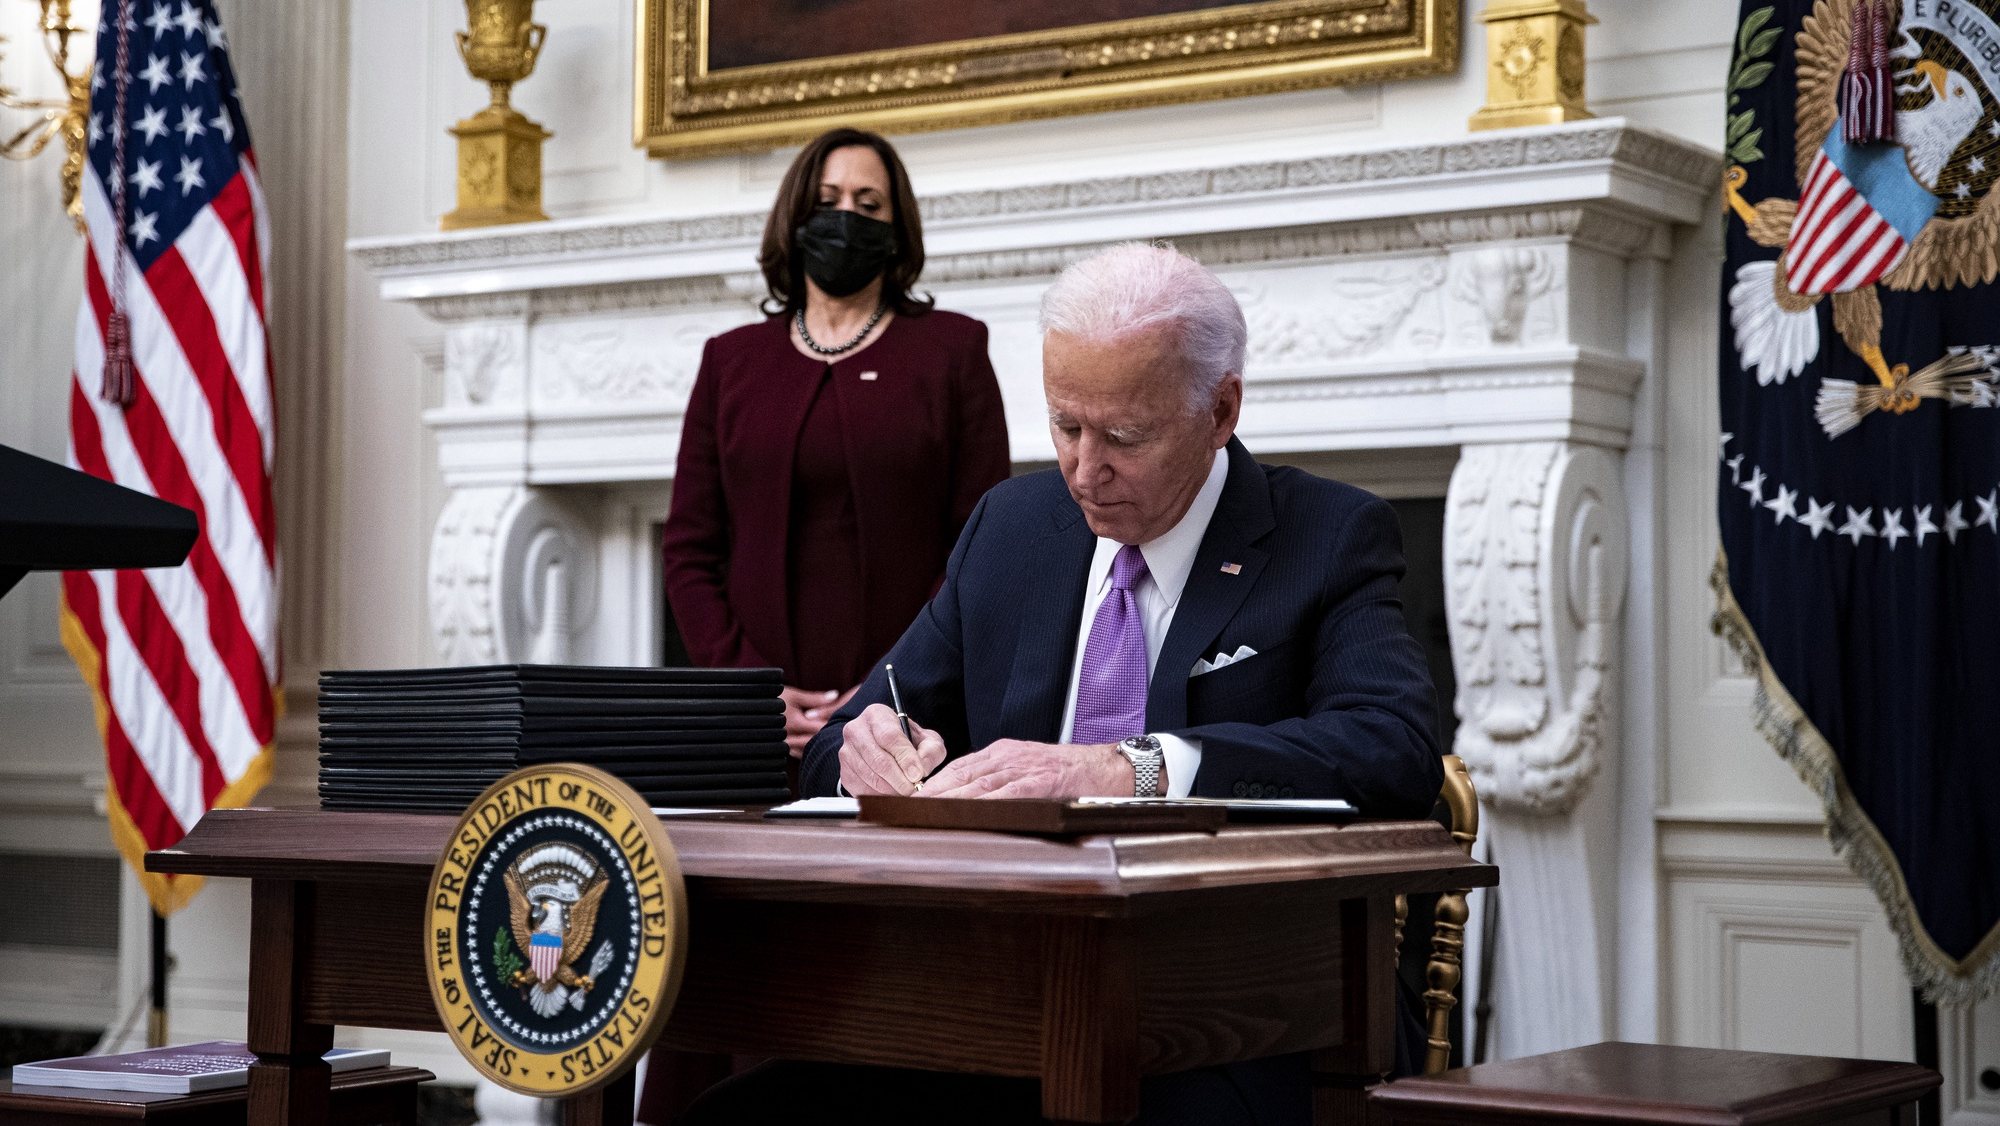 epa08956525 US President Joe Biden signs an executive order after speaking during an event on his administration&#039;s Covid-19 response with U.S. Vice President Kamala Harris, left, in the State Dining Room of the White House in Washington, DC, USA, on 21 January 2021. Biden in his first full day in office plans to issue a sweeping set of executive orders to tackle the raging Covid-19 pandemic to rapidly reverse or refashion many of his predecessor&#039;s most heavily criticized policies.  EPA/Al Drago / POOL